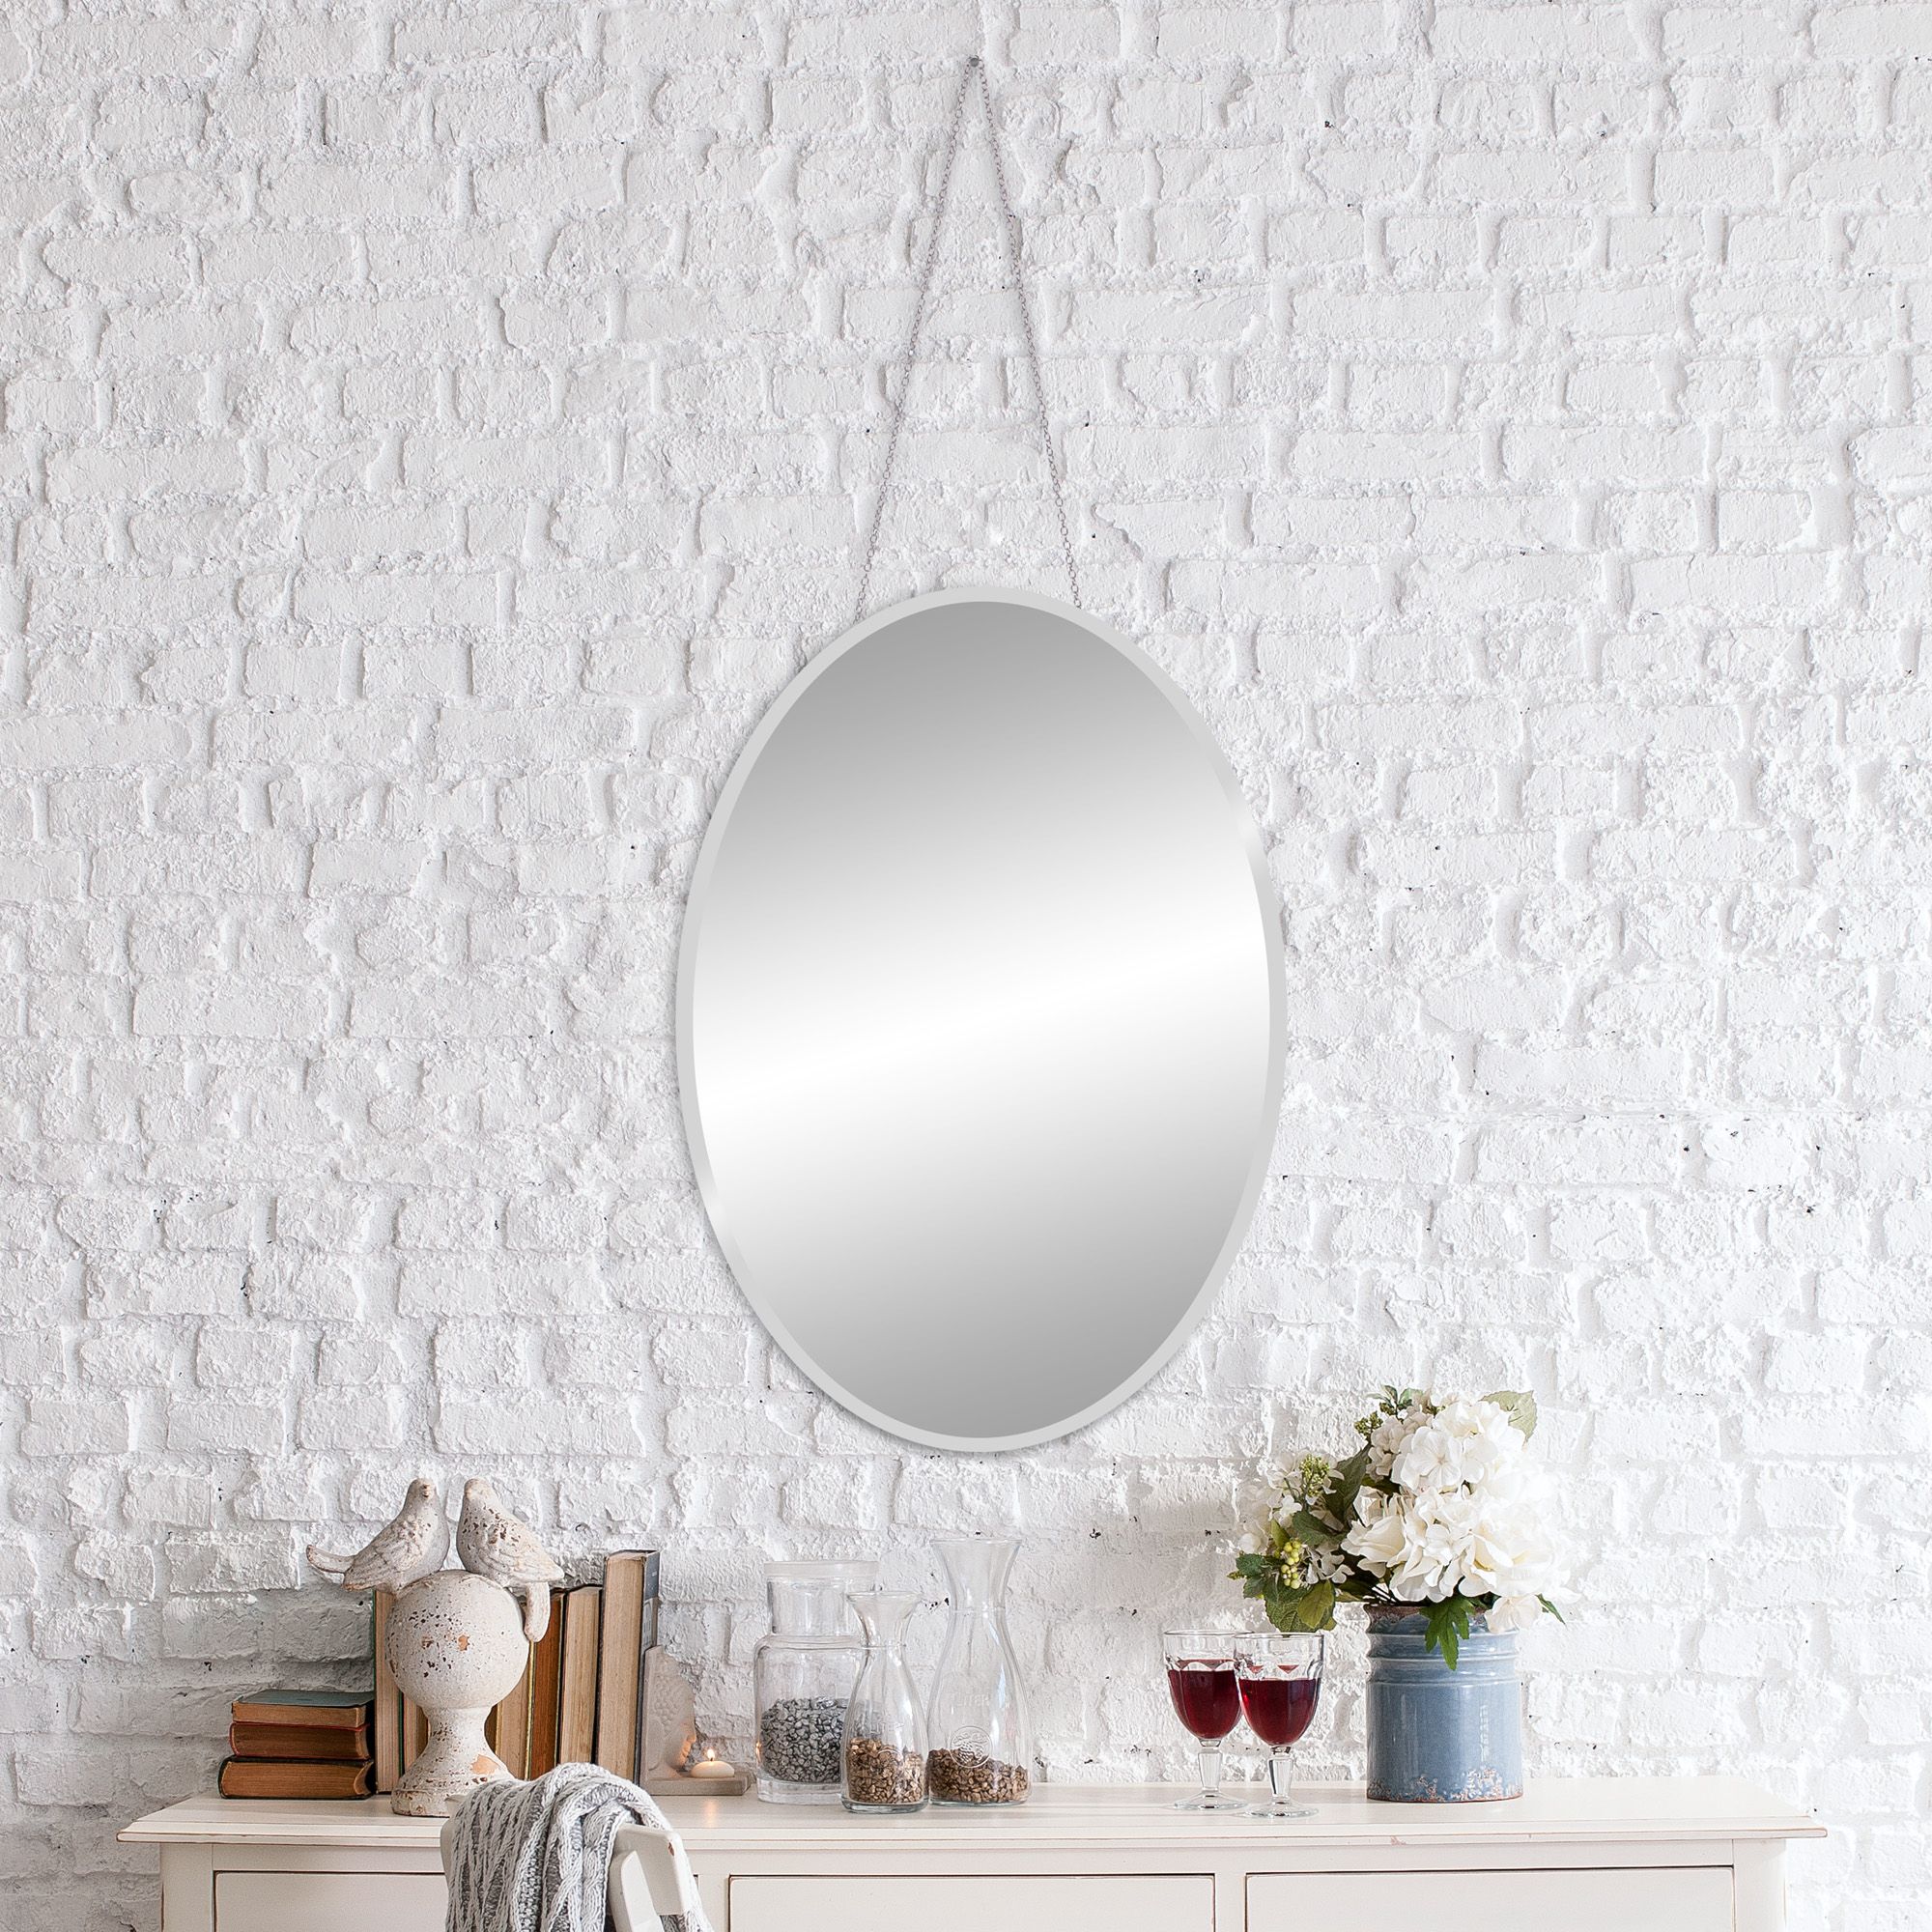 Patton Wall Decor 17x24 Frameless Beveled Oval Mirror With Hanging Pertaining To Thornbury Oval Bevel Frameless Wall Mirrors (View 5 of 15)